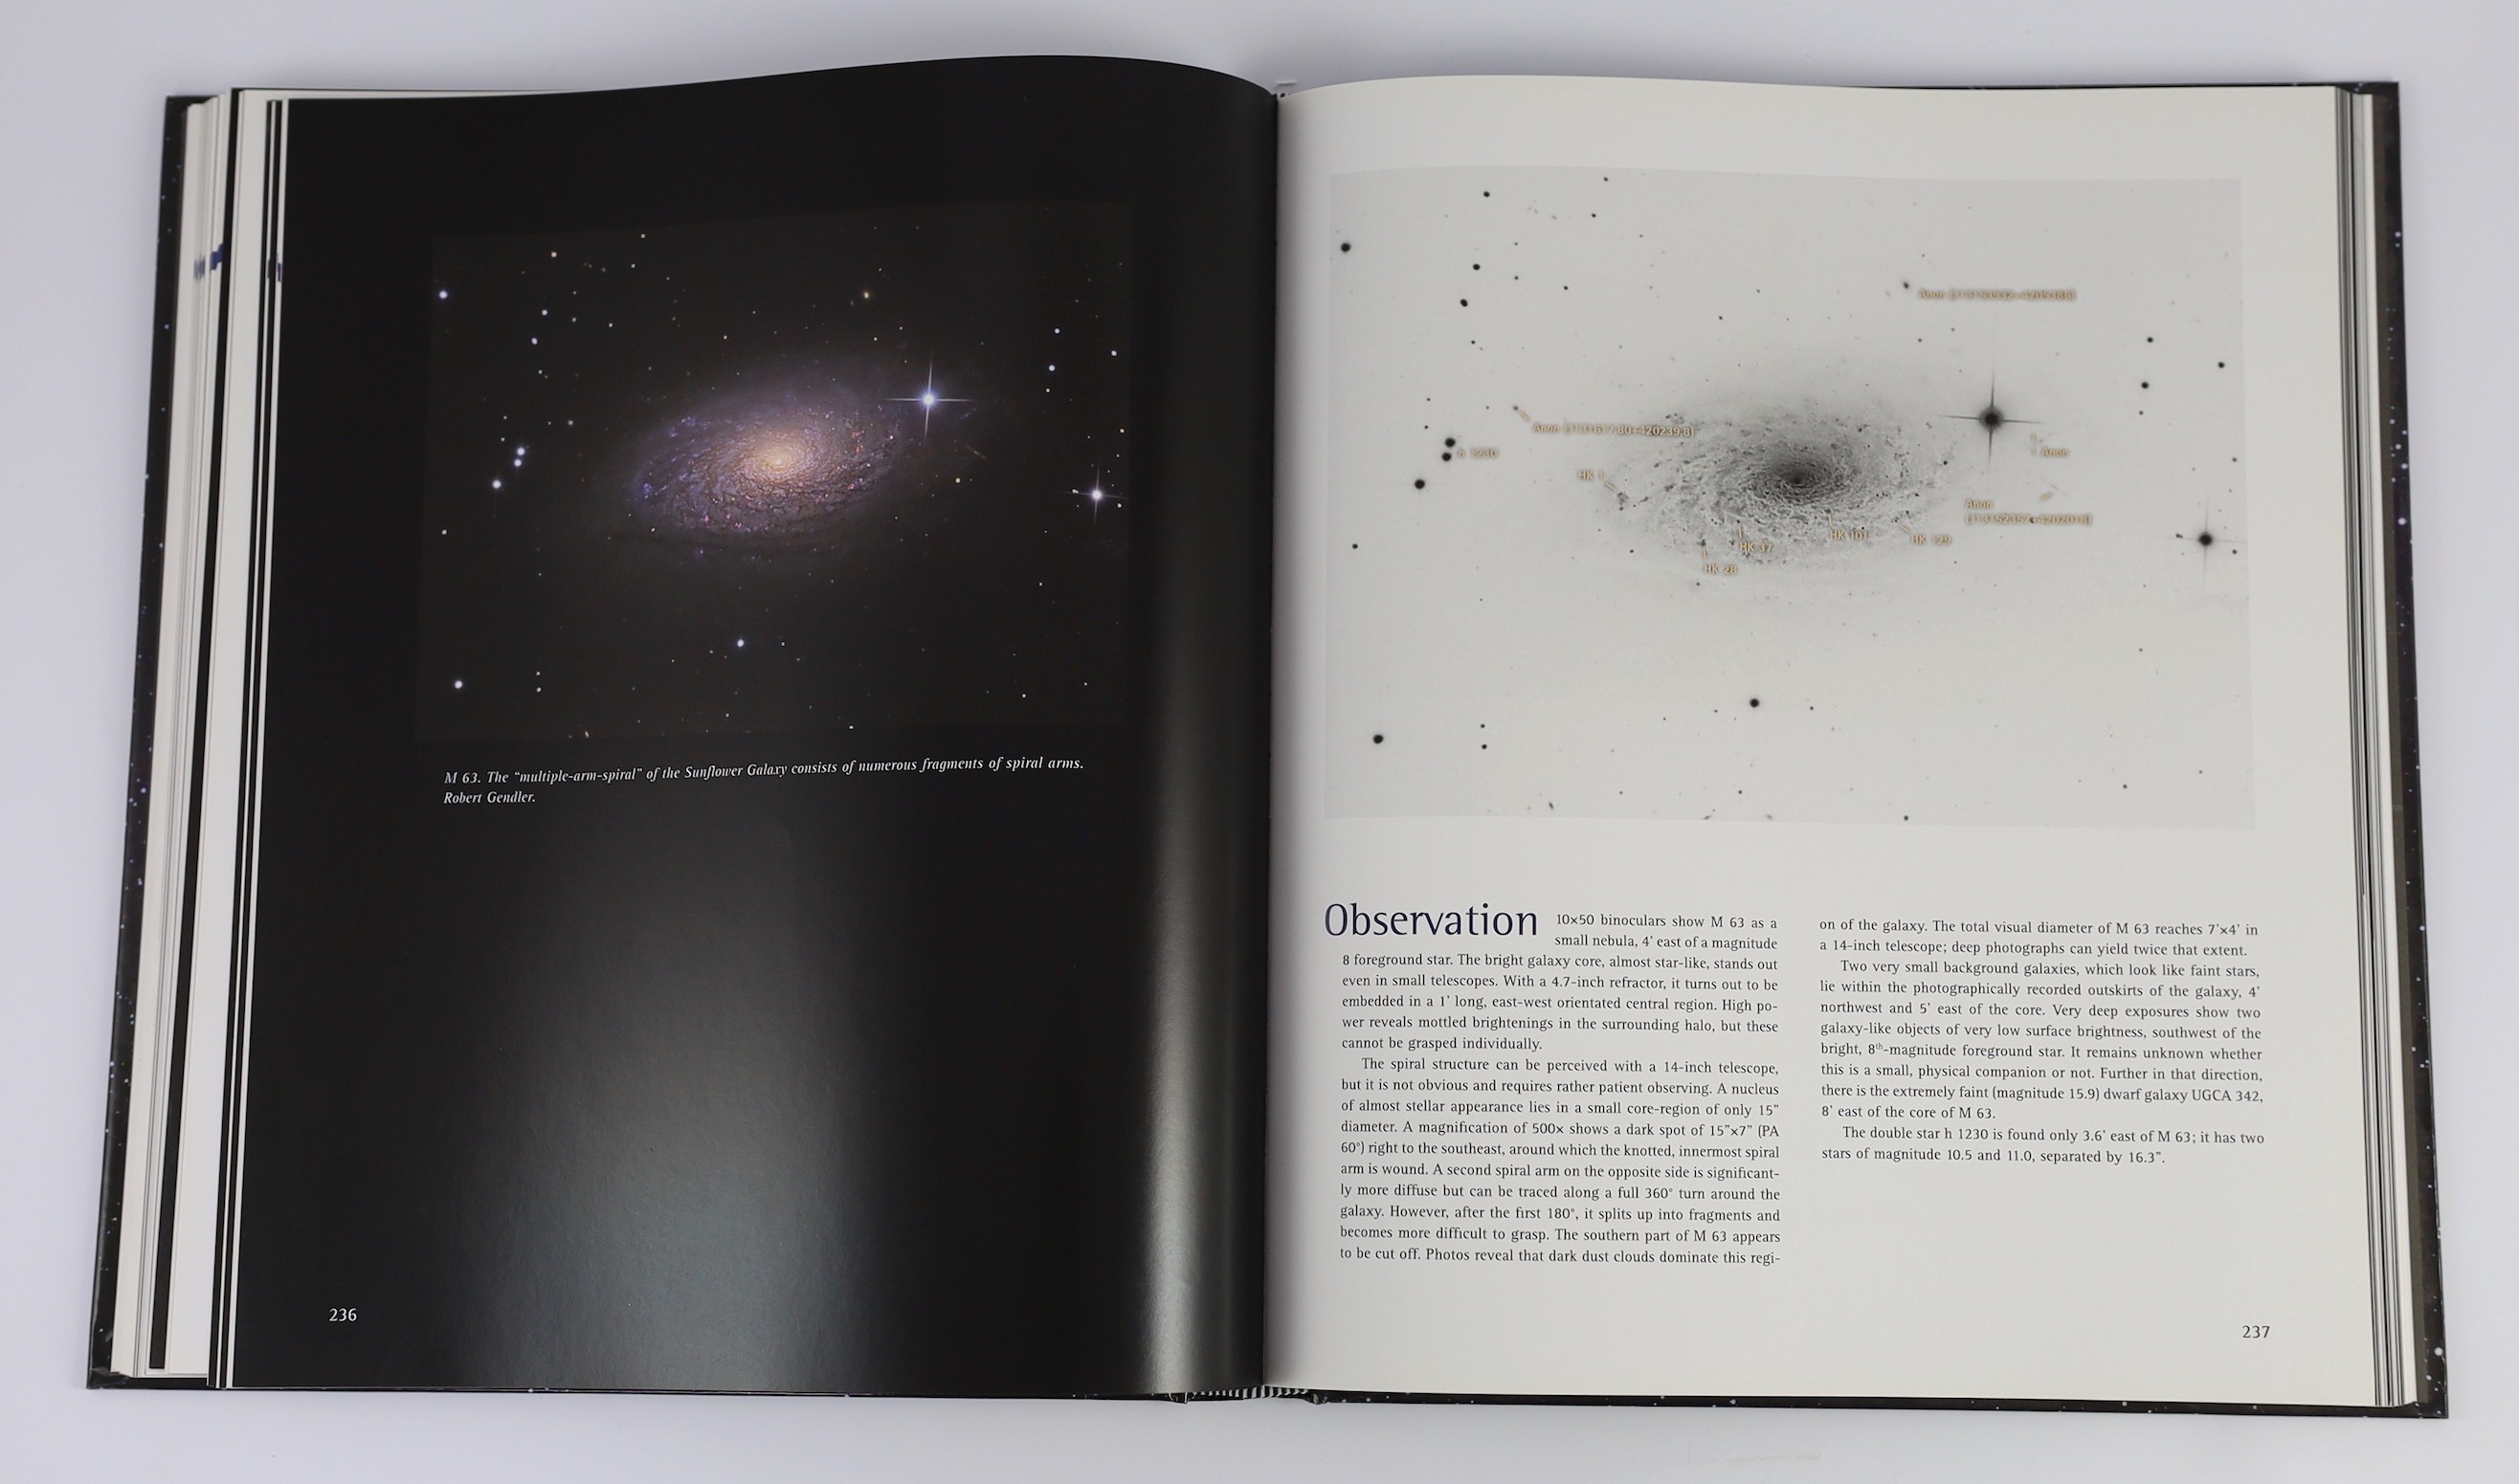 Stoyan, Ronald et al - Atlas of the Messier Objects: Highlights of the Deep Sky, 4to, photographic hard cover, Cambridge University Press, 2008